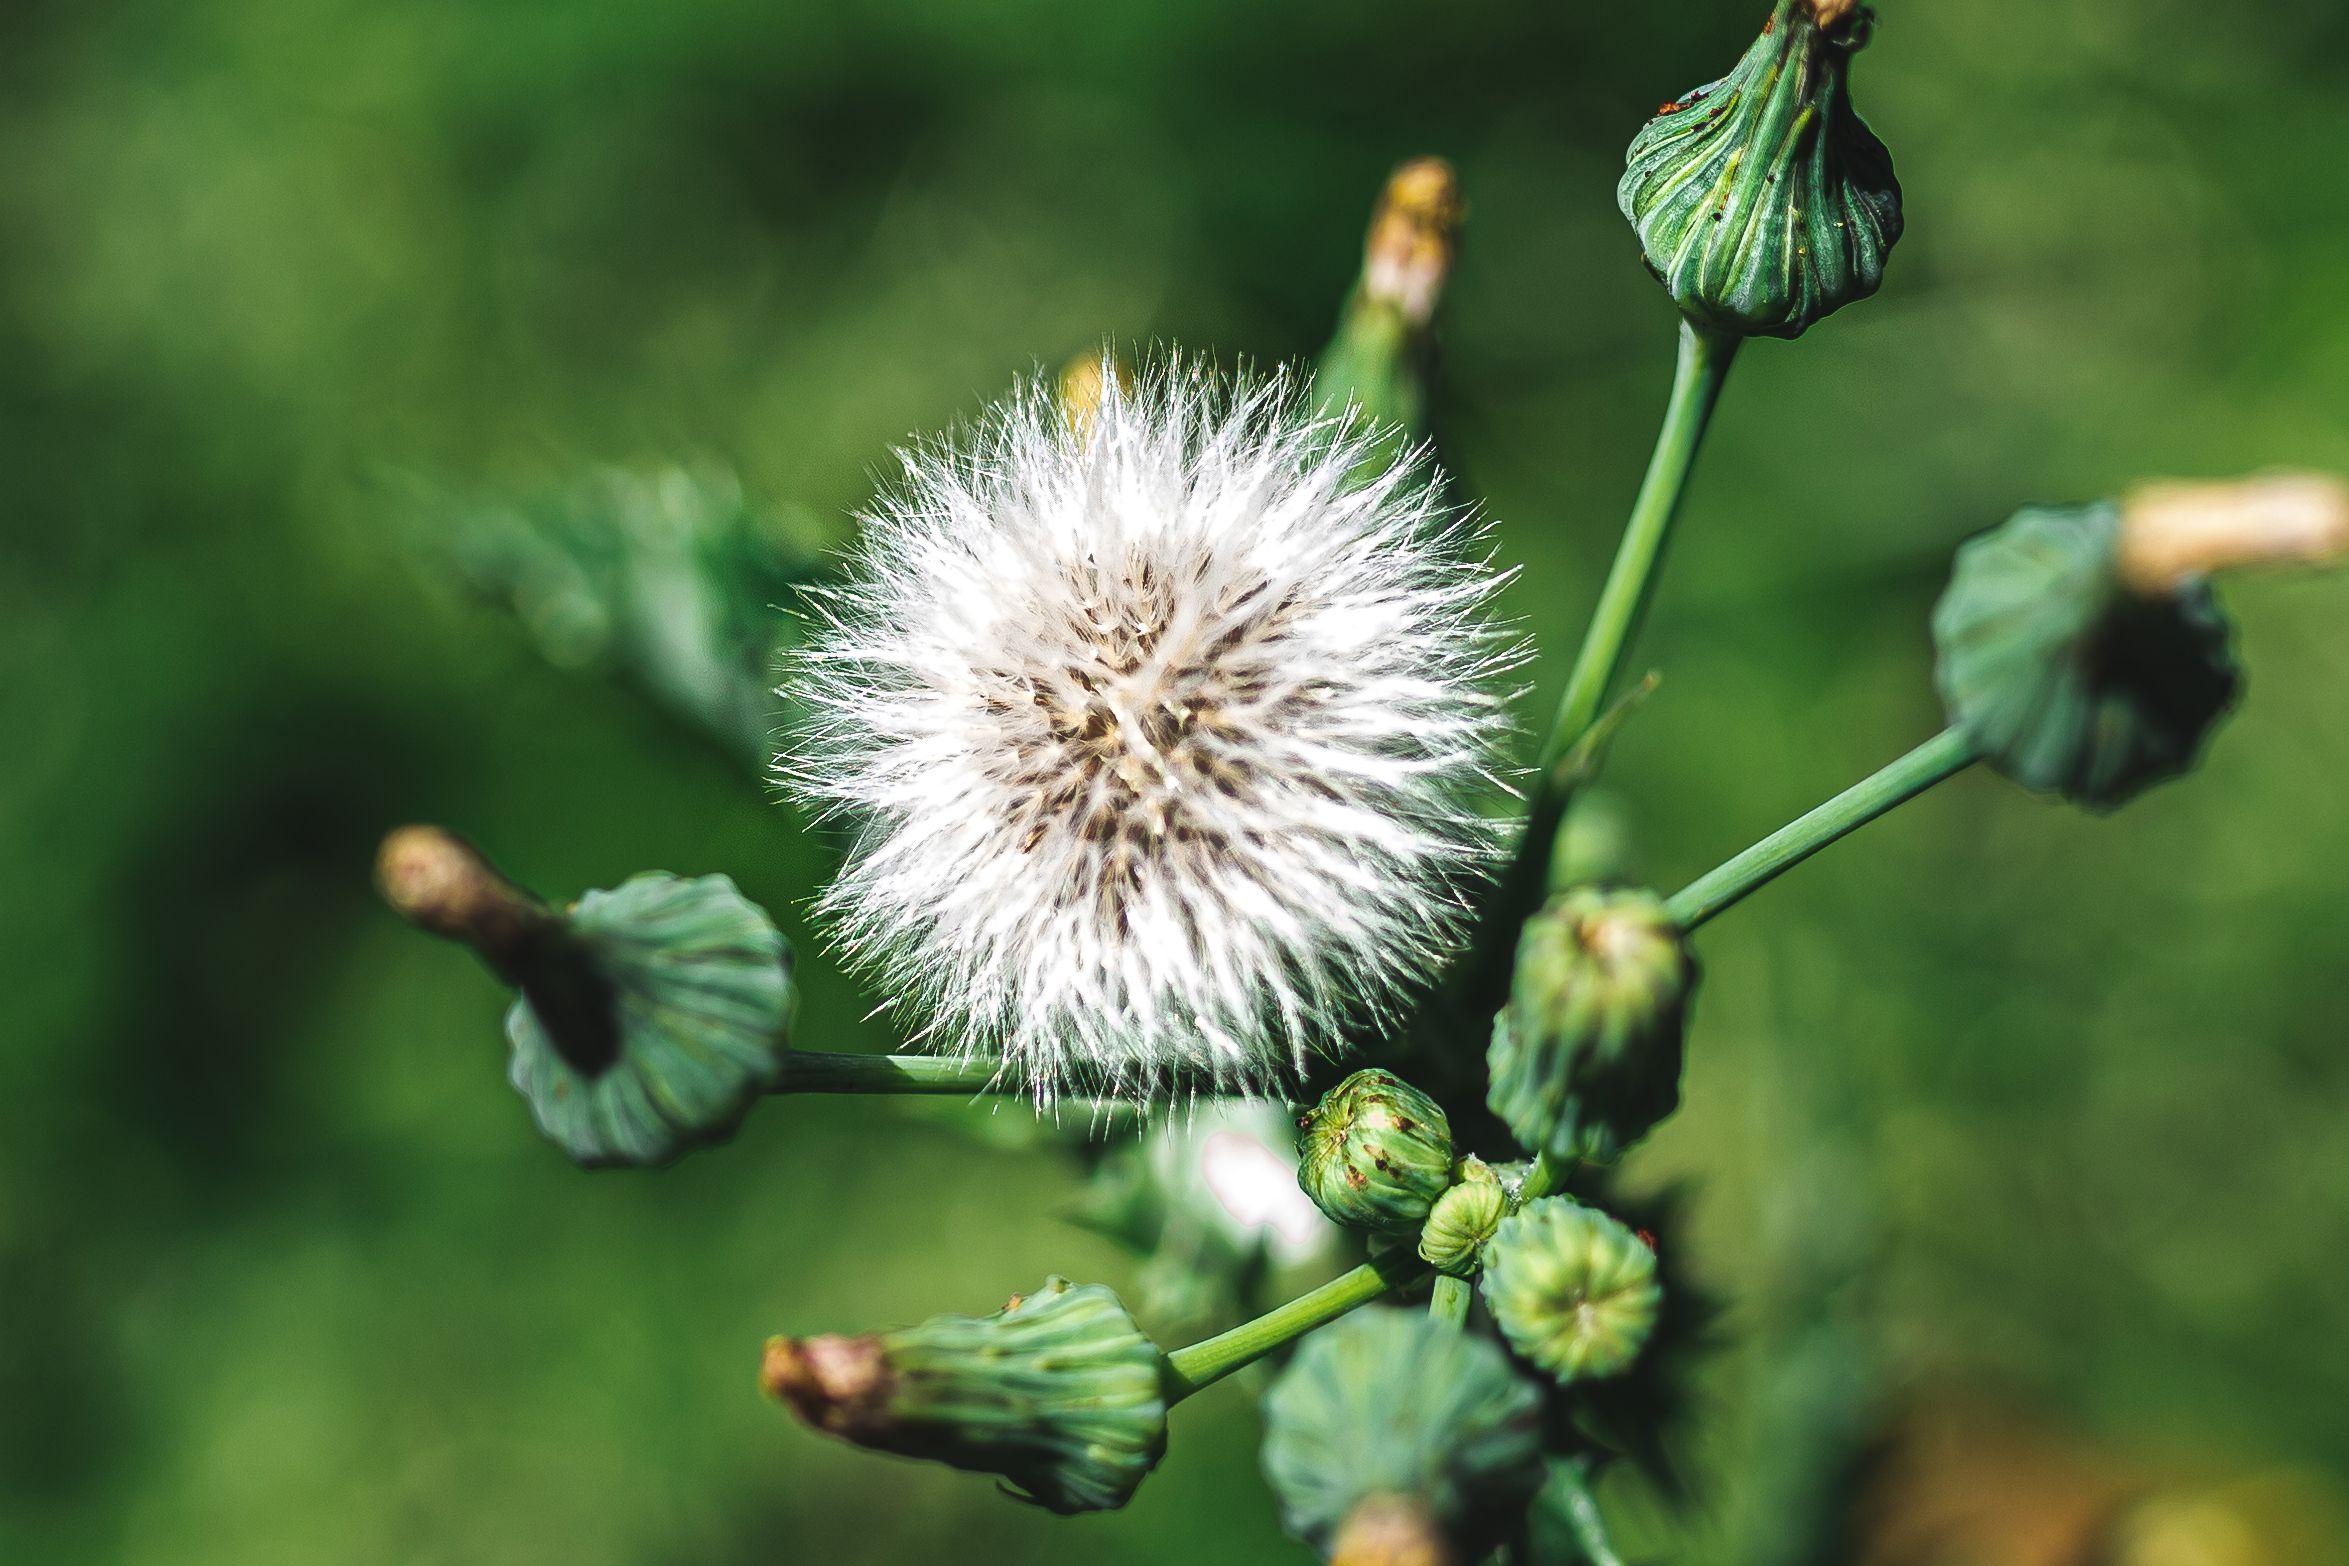 Common Types of Weeds Every Gardener Should Know